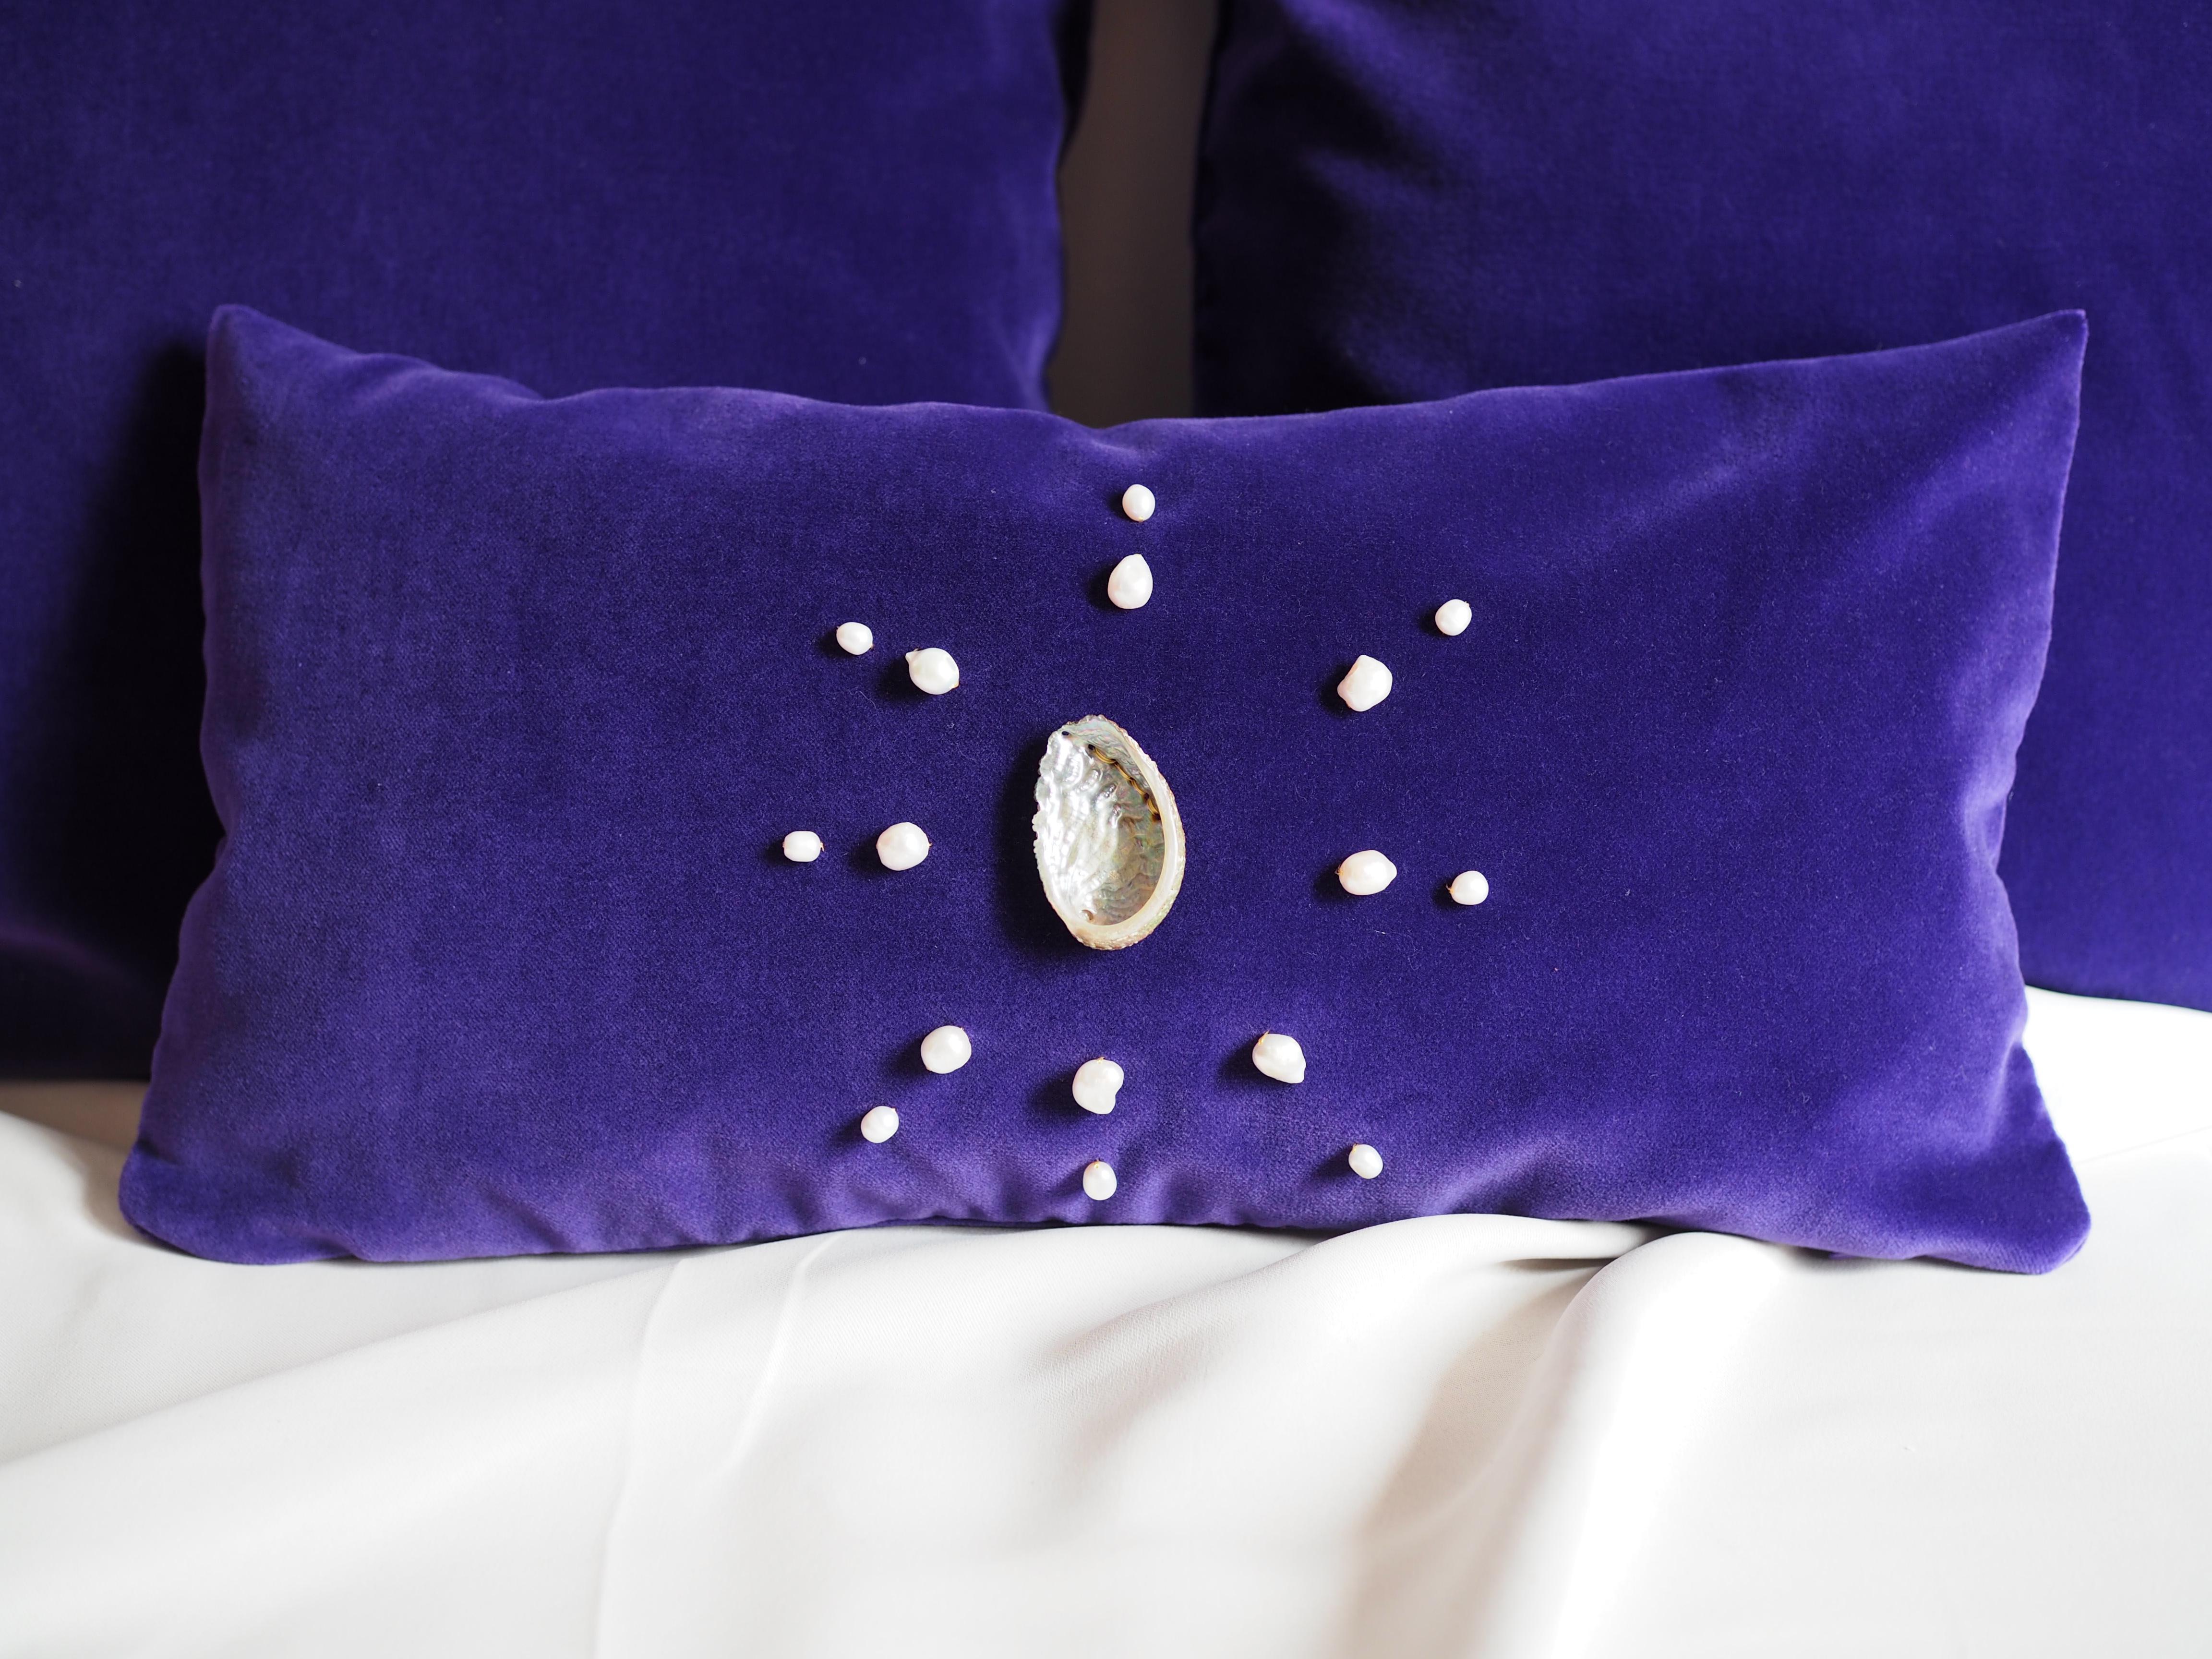 Limited edition embroidered cushion with natural pearls and shells.
Hedonism is the search for pleasure and well-being in any area of our lives, it is the cult of the body, money or carnal pleasure. For me, hedonism is fun, enjoyment, beauty, taking